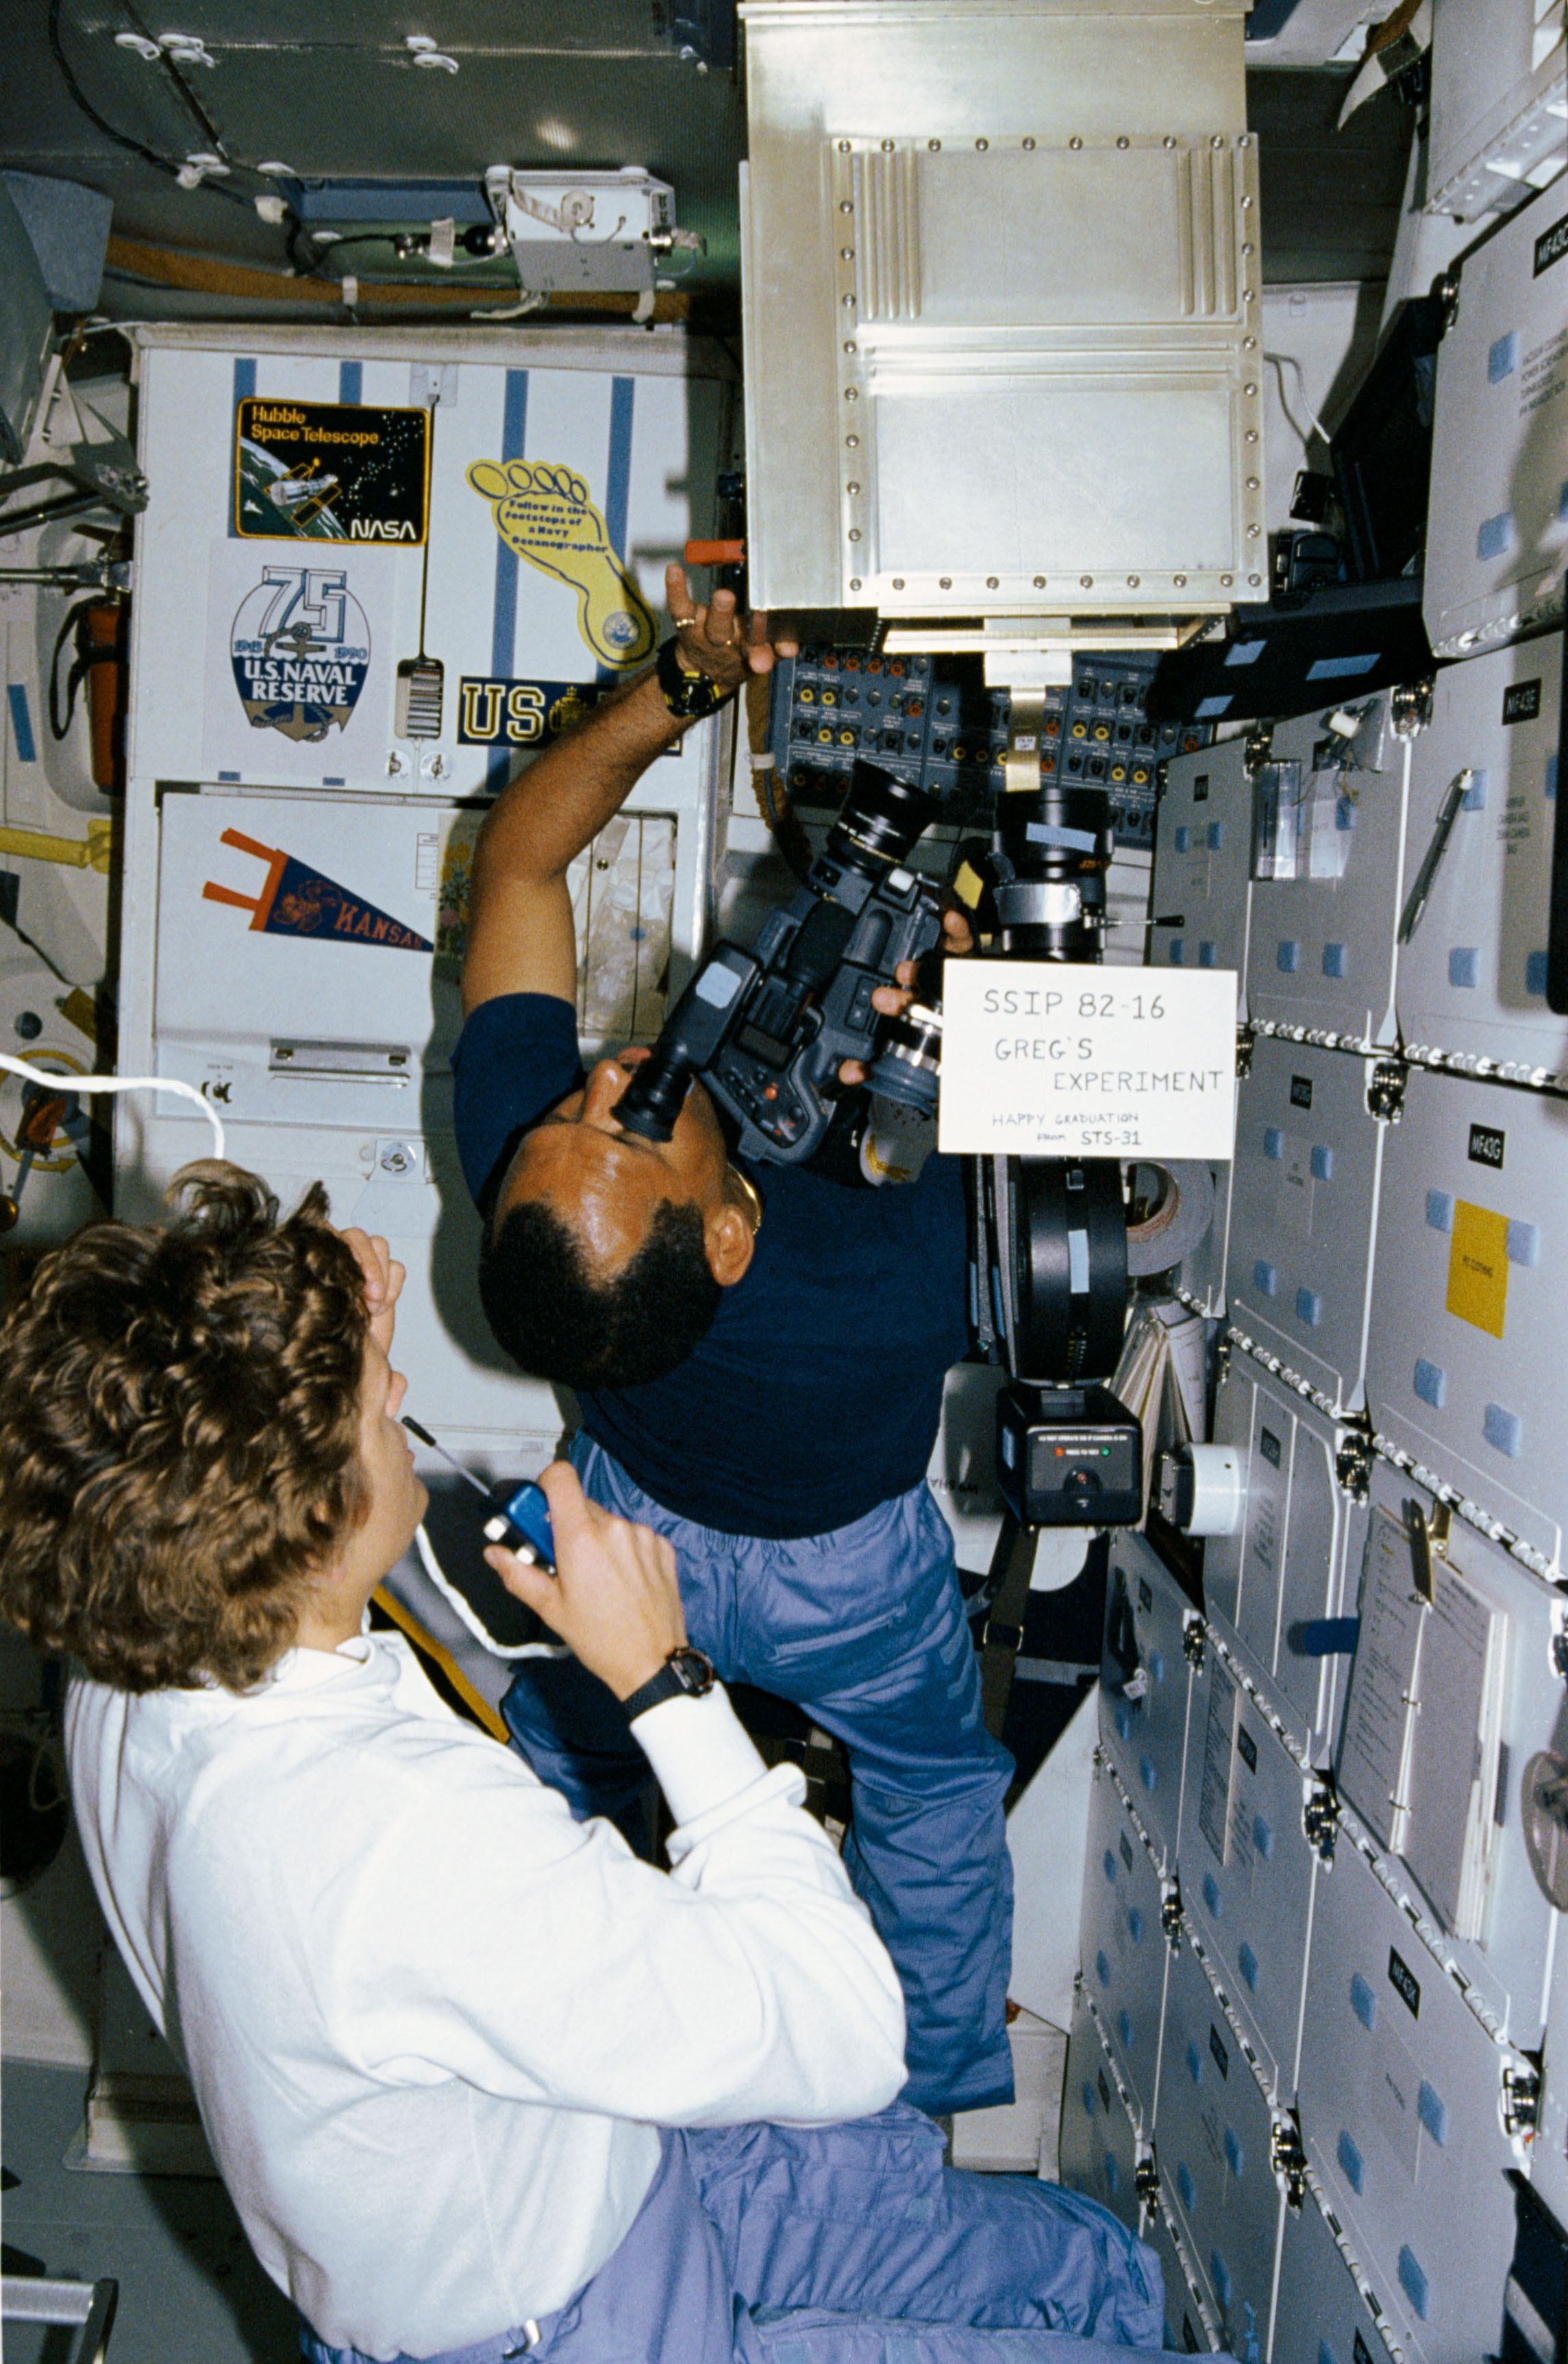 AN astronaut with a video camera and a second astronaut assisting in the space shuttle.